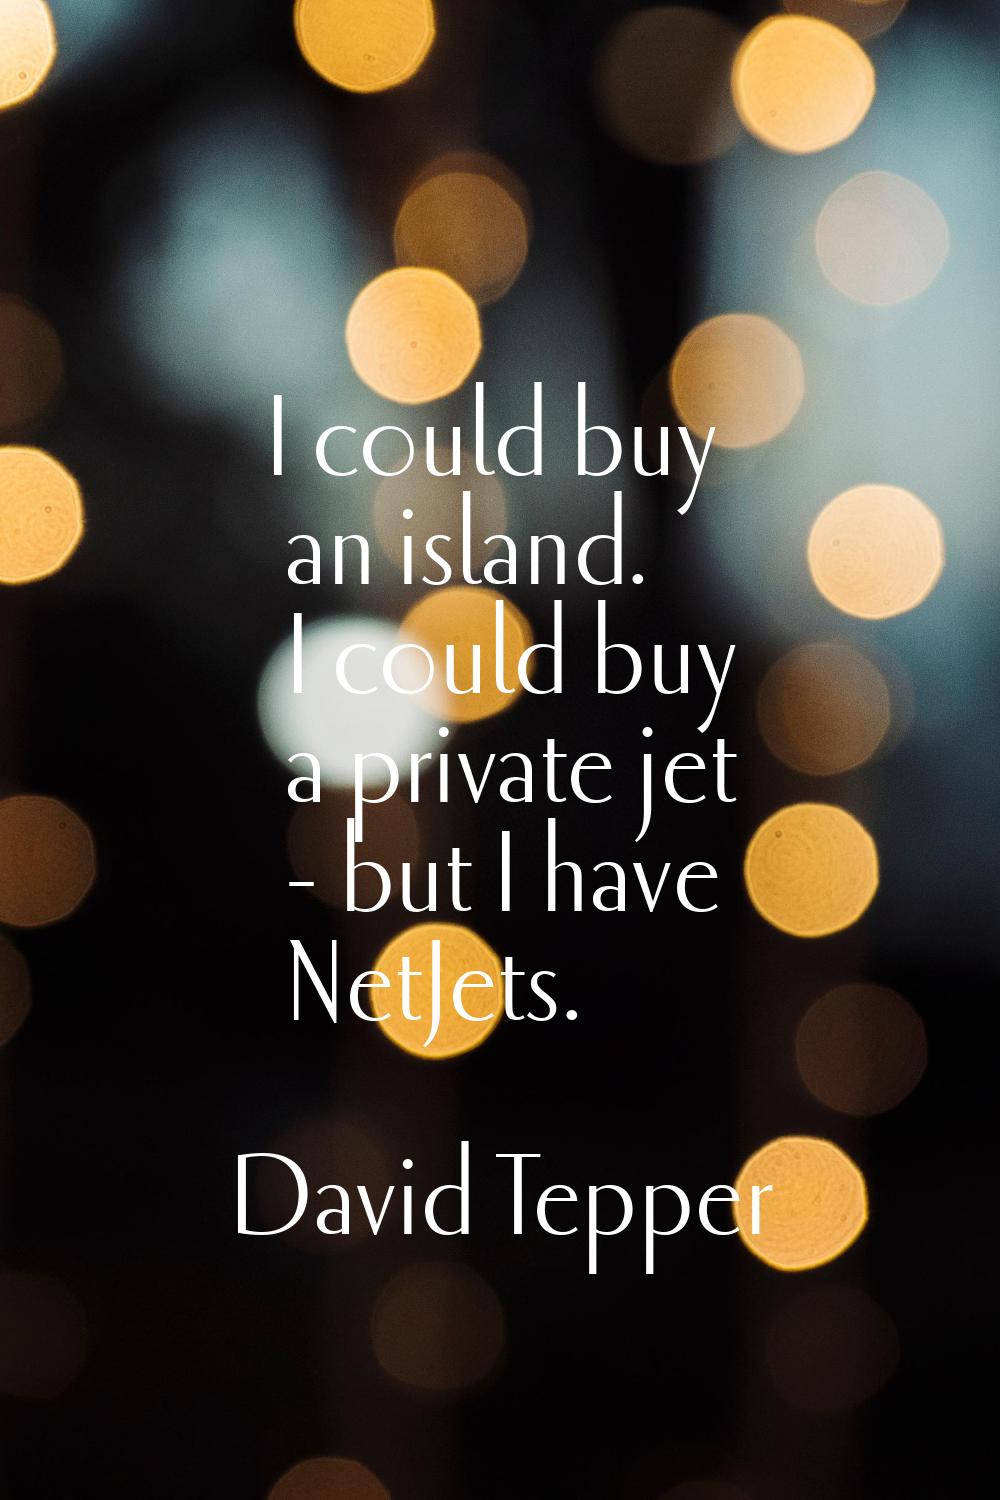 I could buy an island. I could buy a private jet - but I have NetJets.